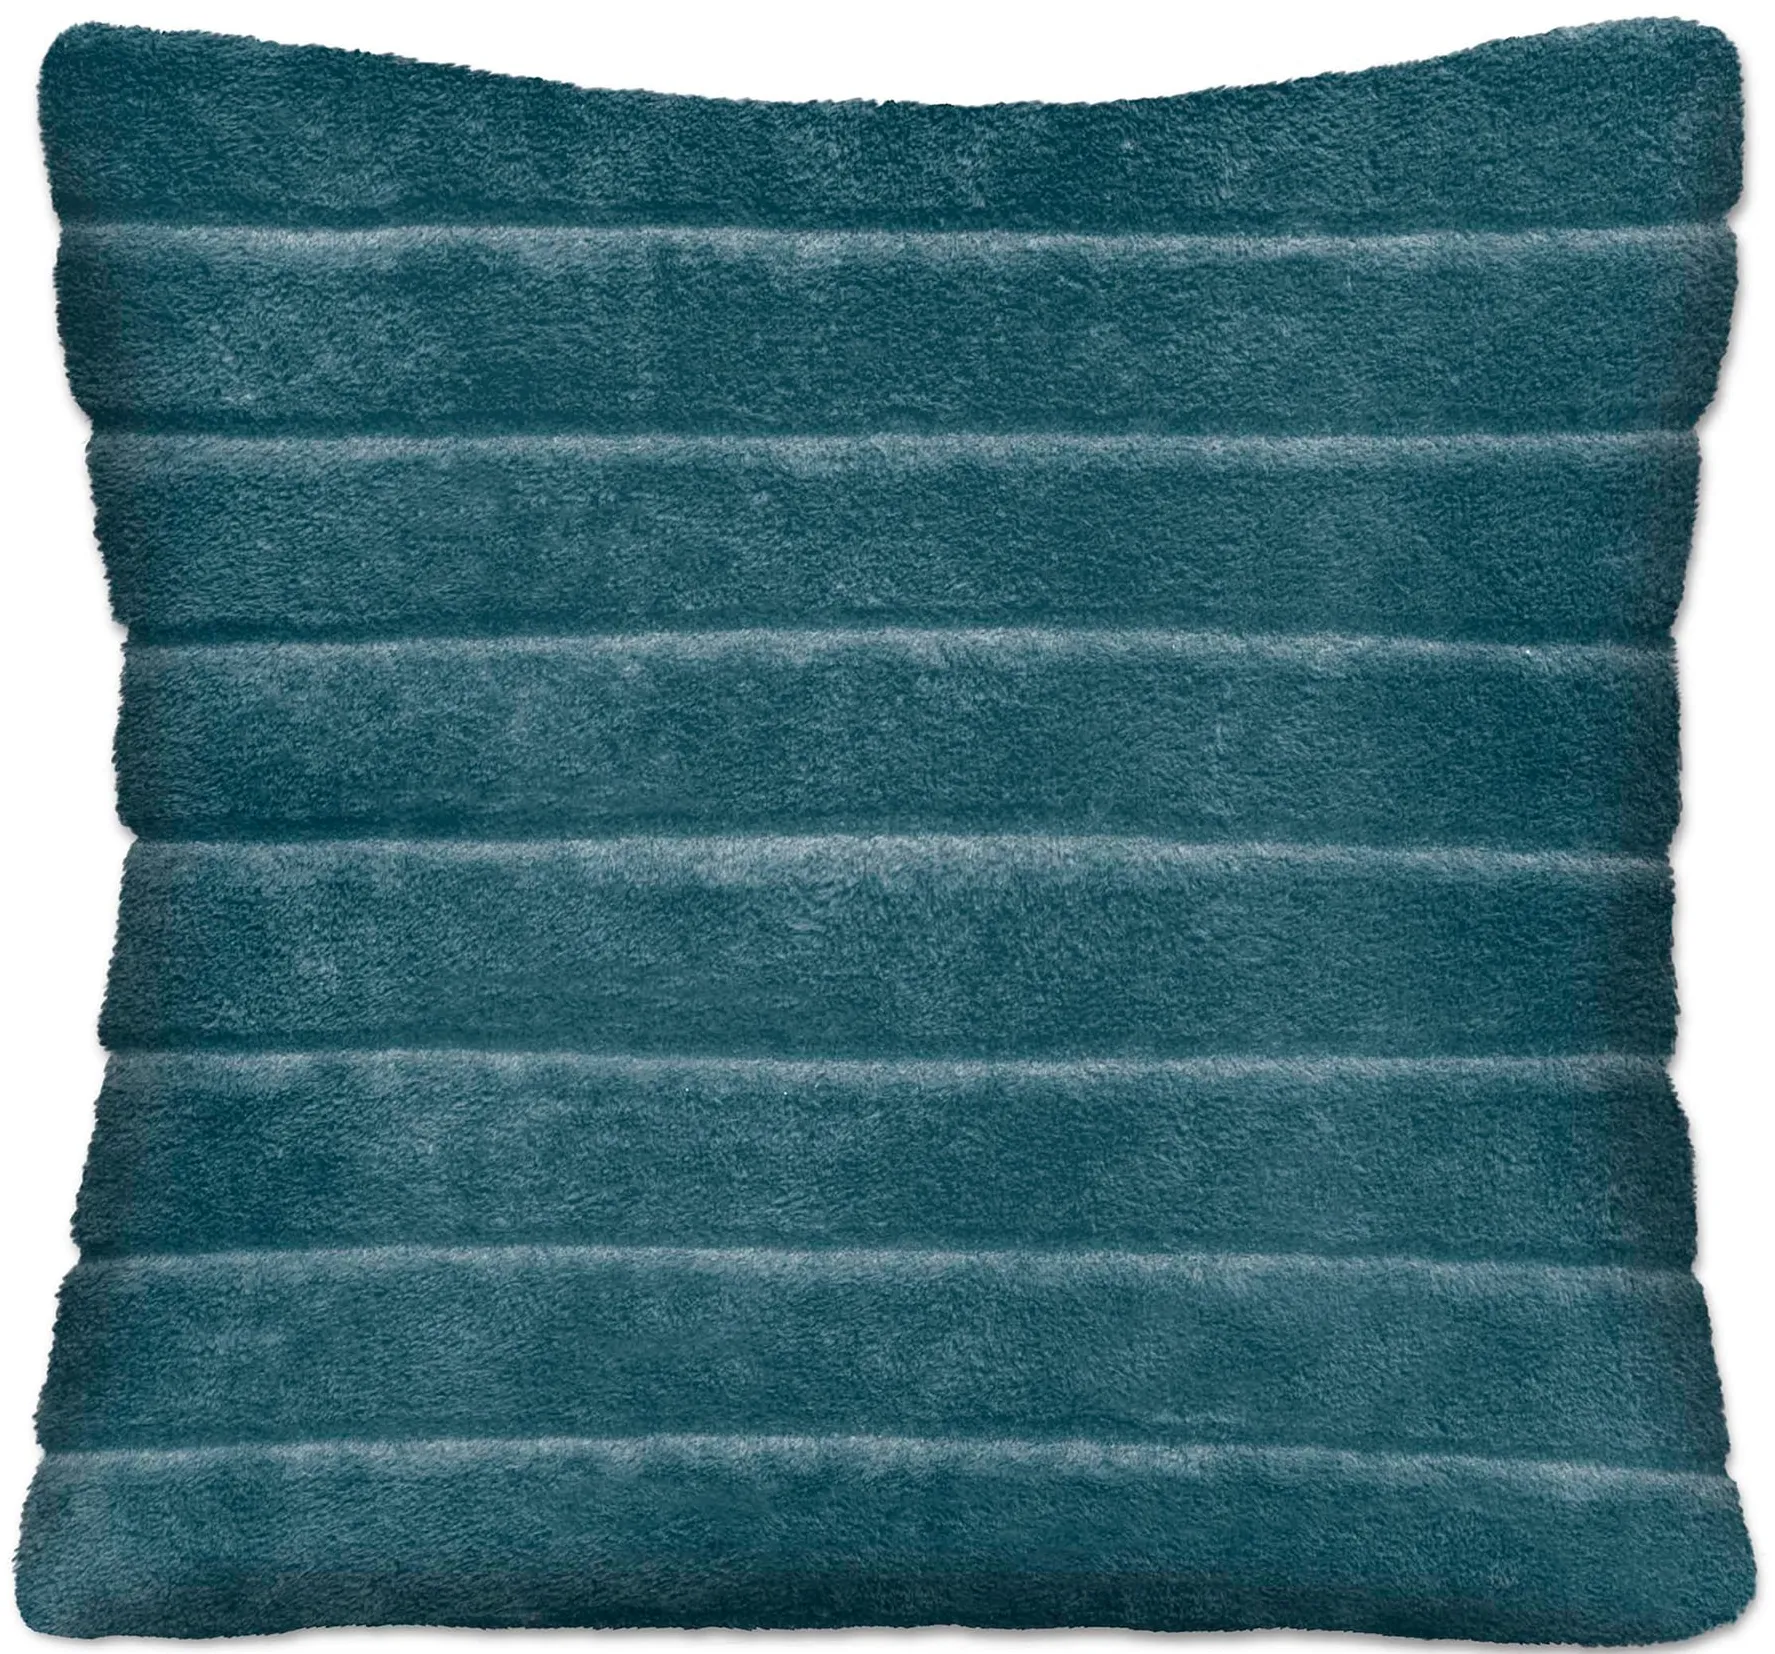 Teal Ribbed Faux Fur Pillow 17"W x 17"H